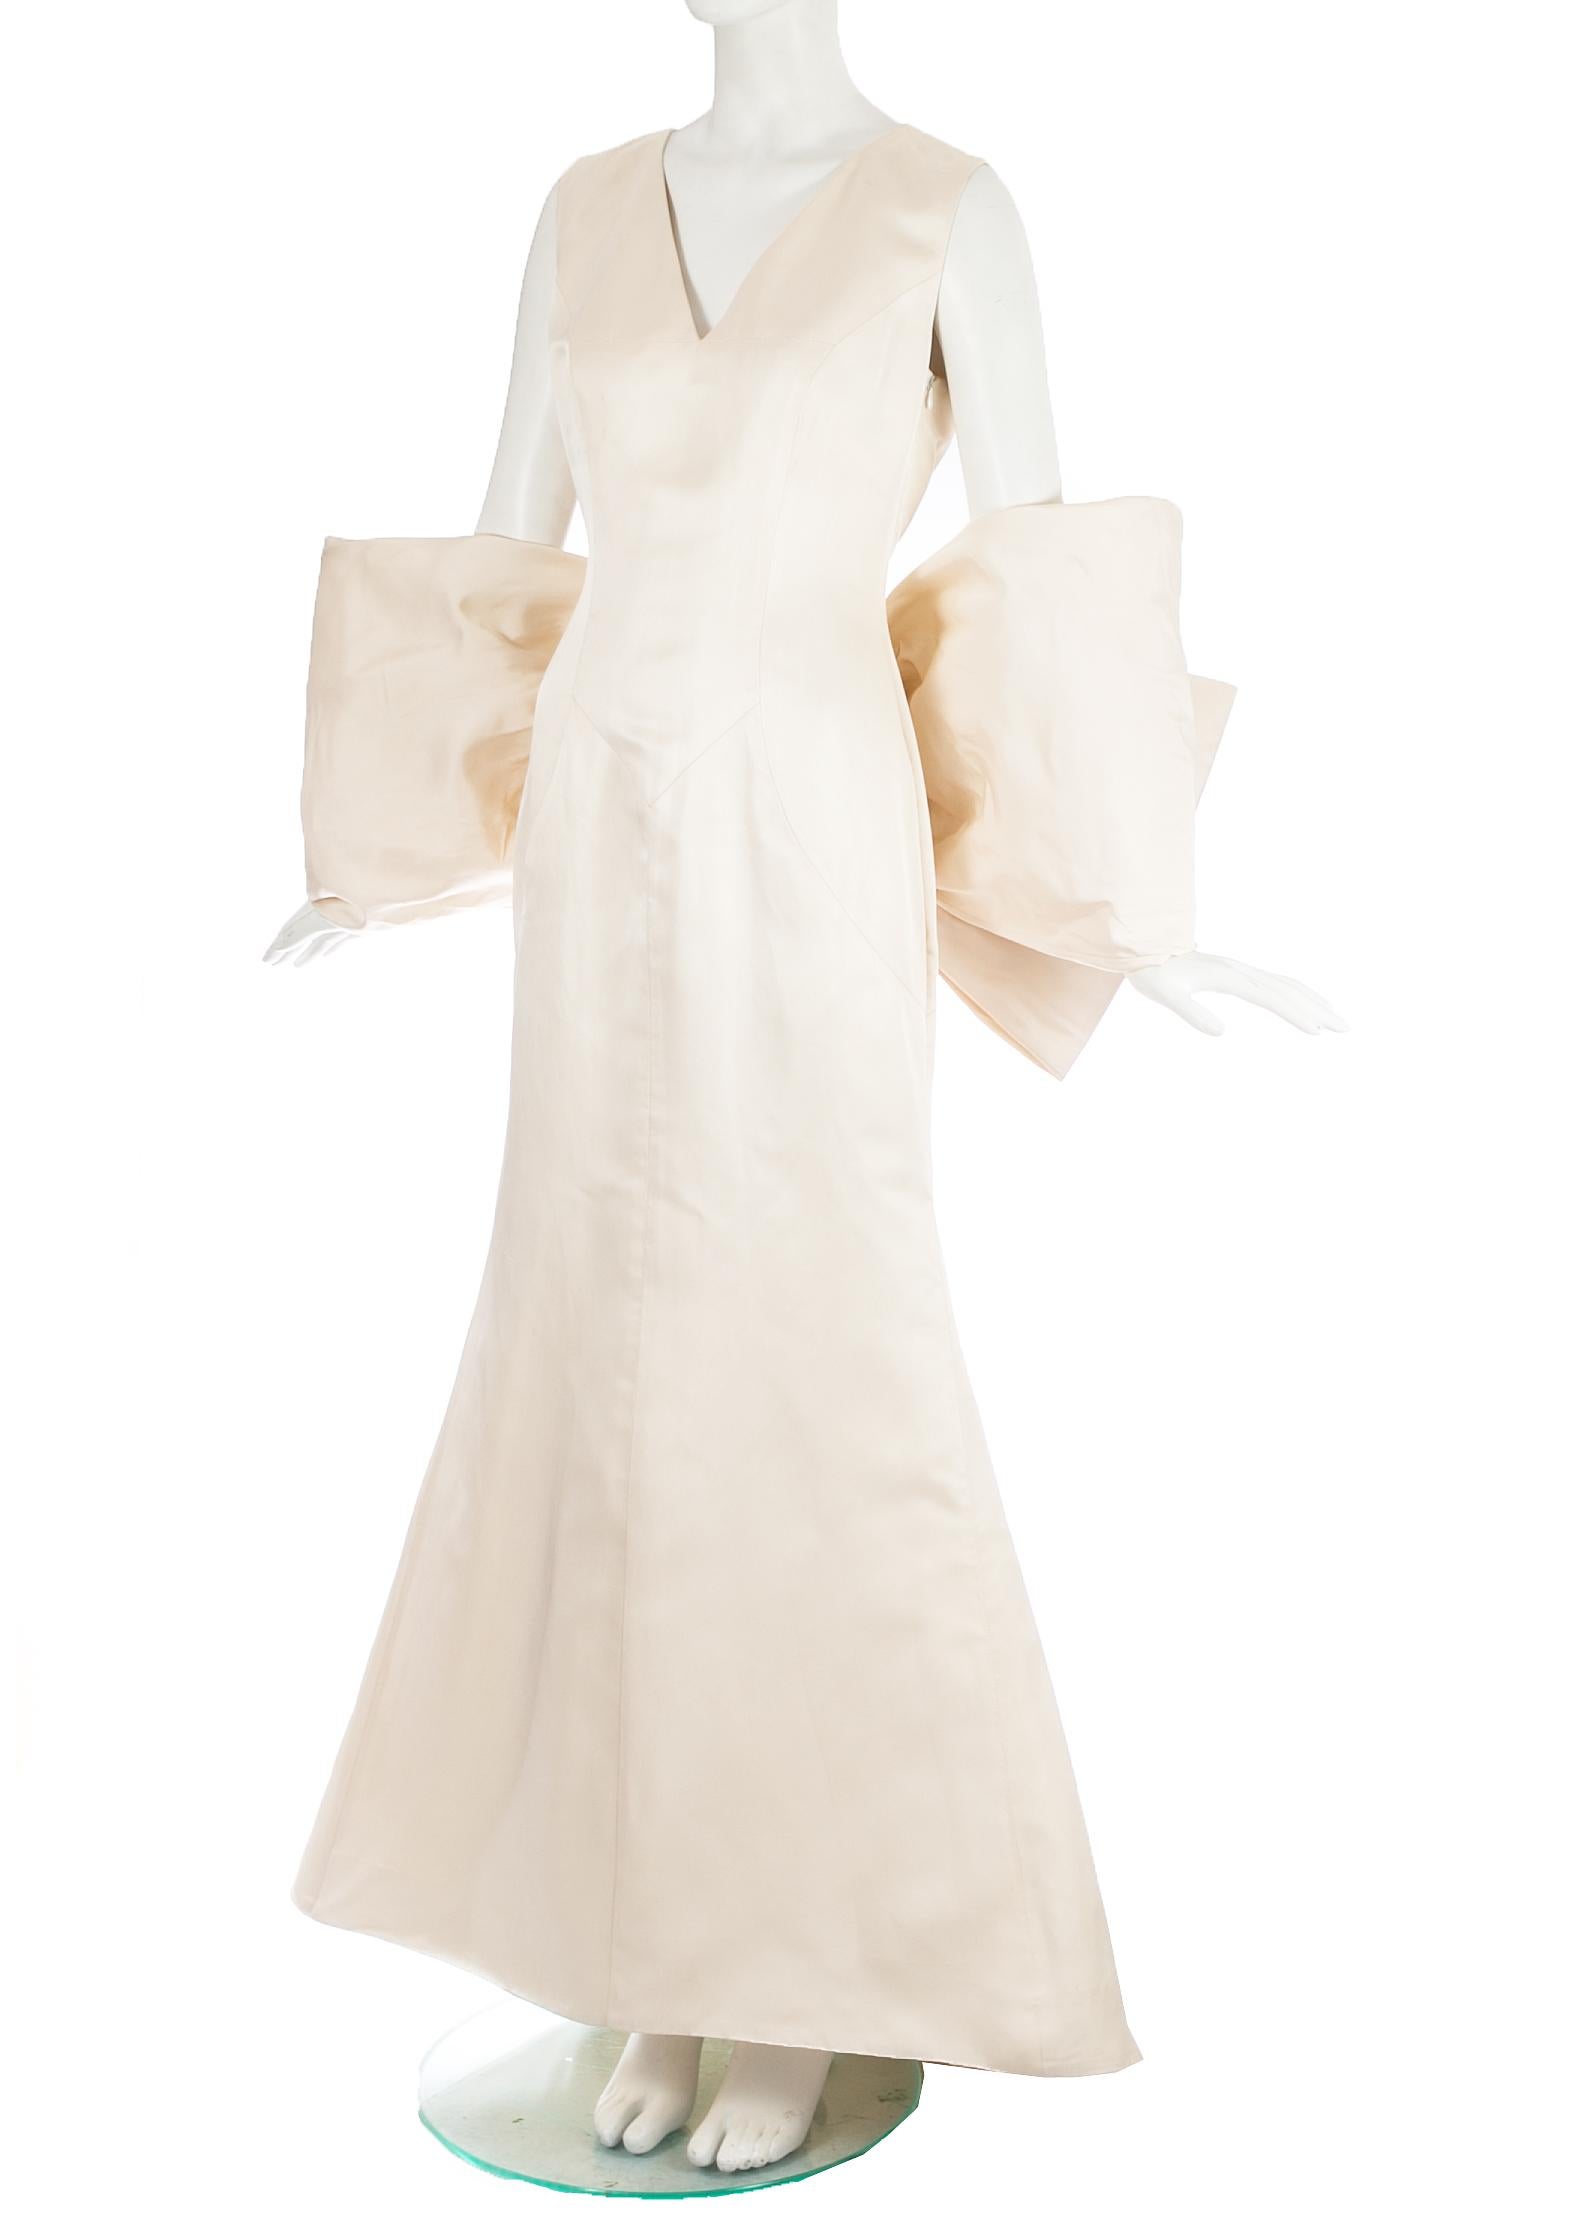 Women's Dolce & Gabbana ivory silk fishtail wedding dress with large bow, c. 1990s For Sale